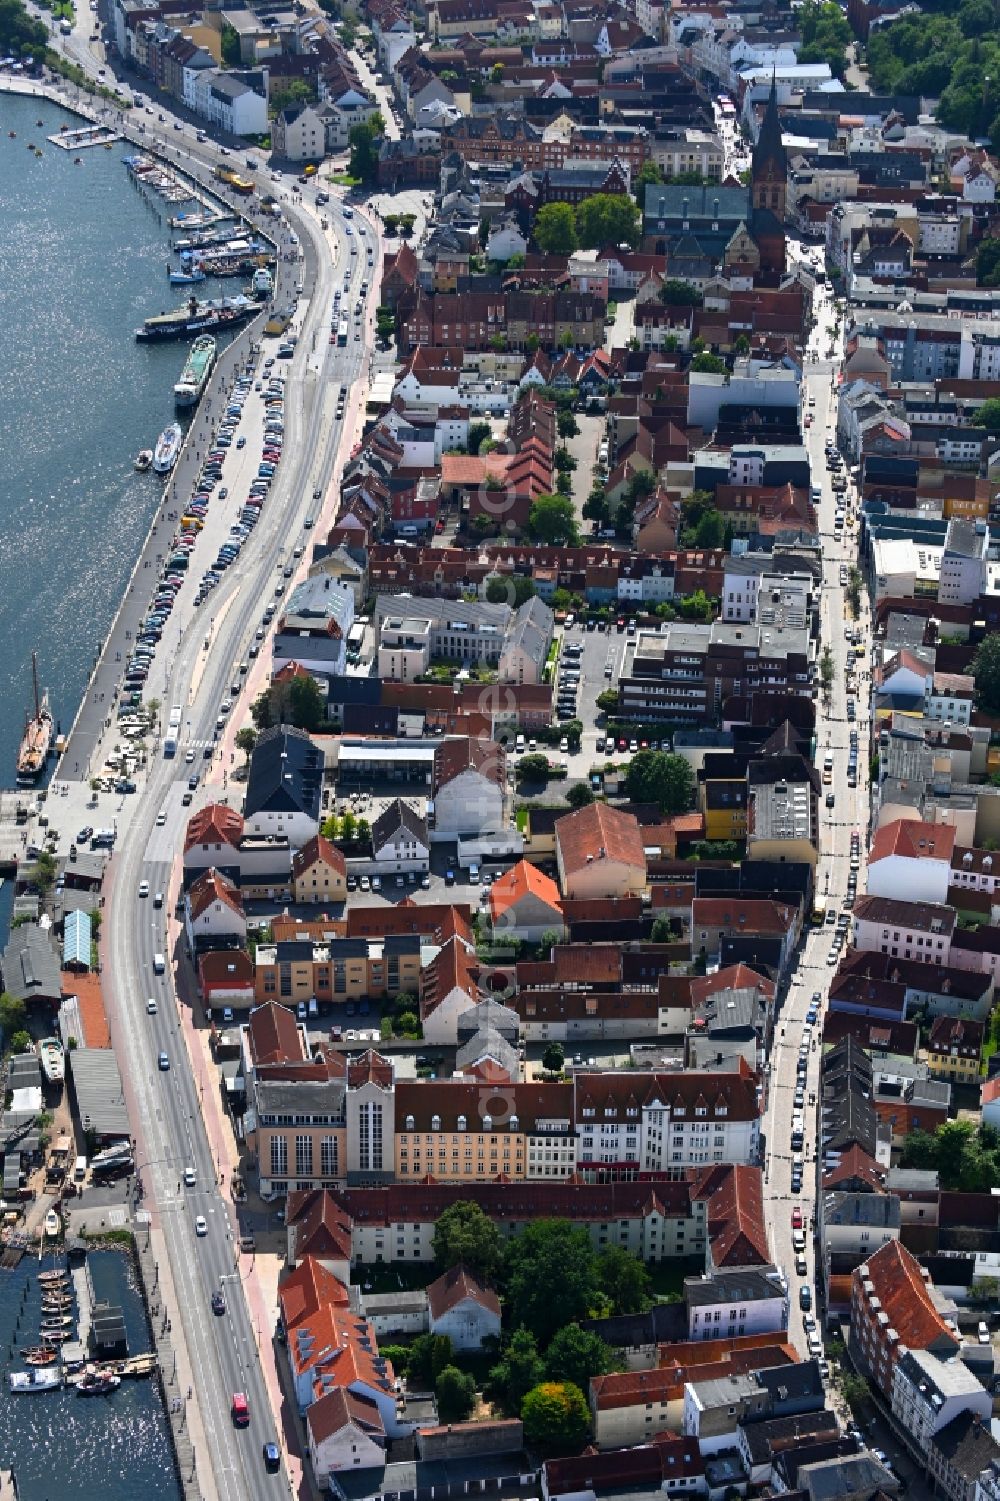 Flensburg from above - Old Town area and city center on Schiffbruecke in the district Altstadt in Flensburg in the state Schleswig-Holstein, Germany